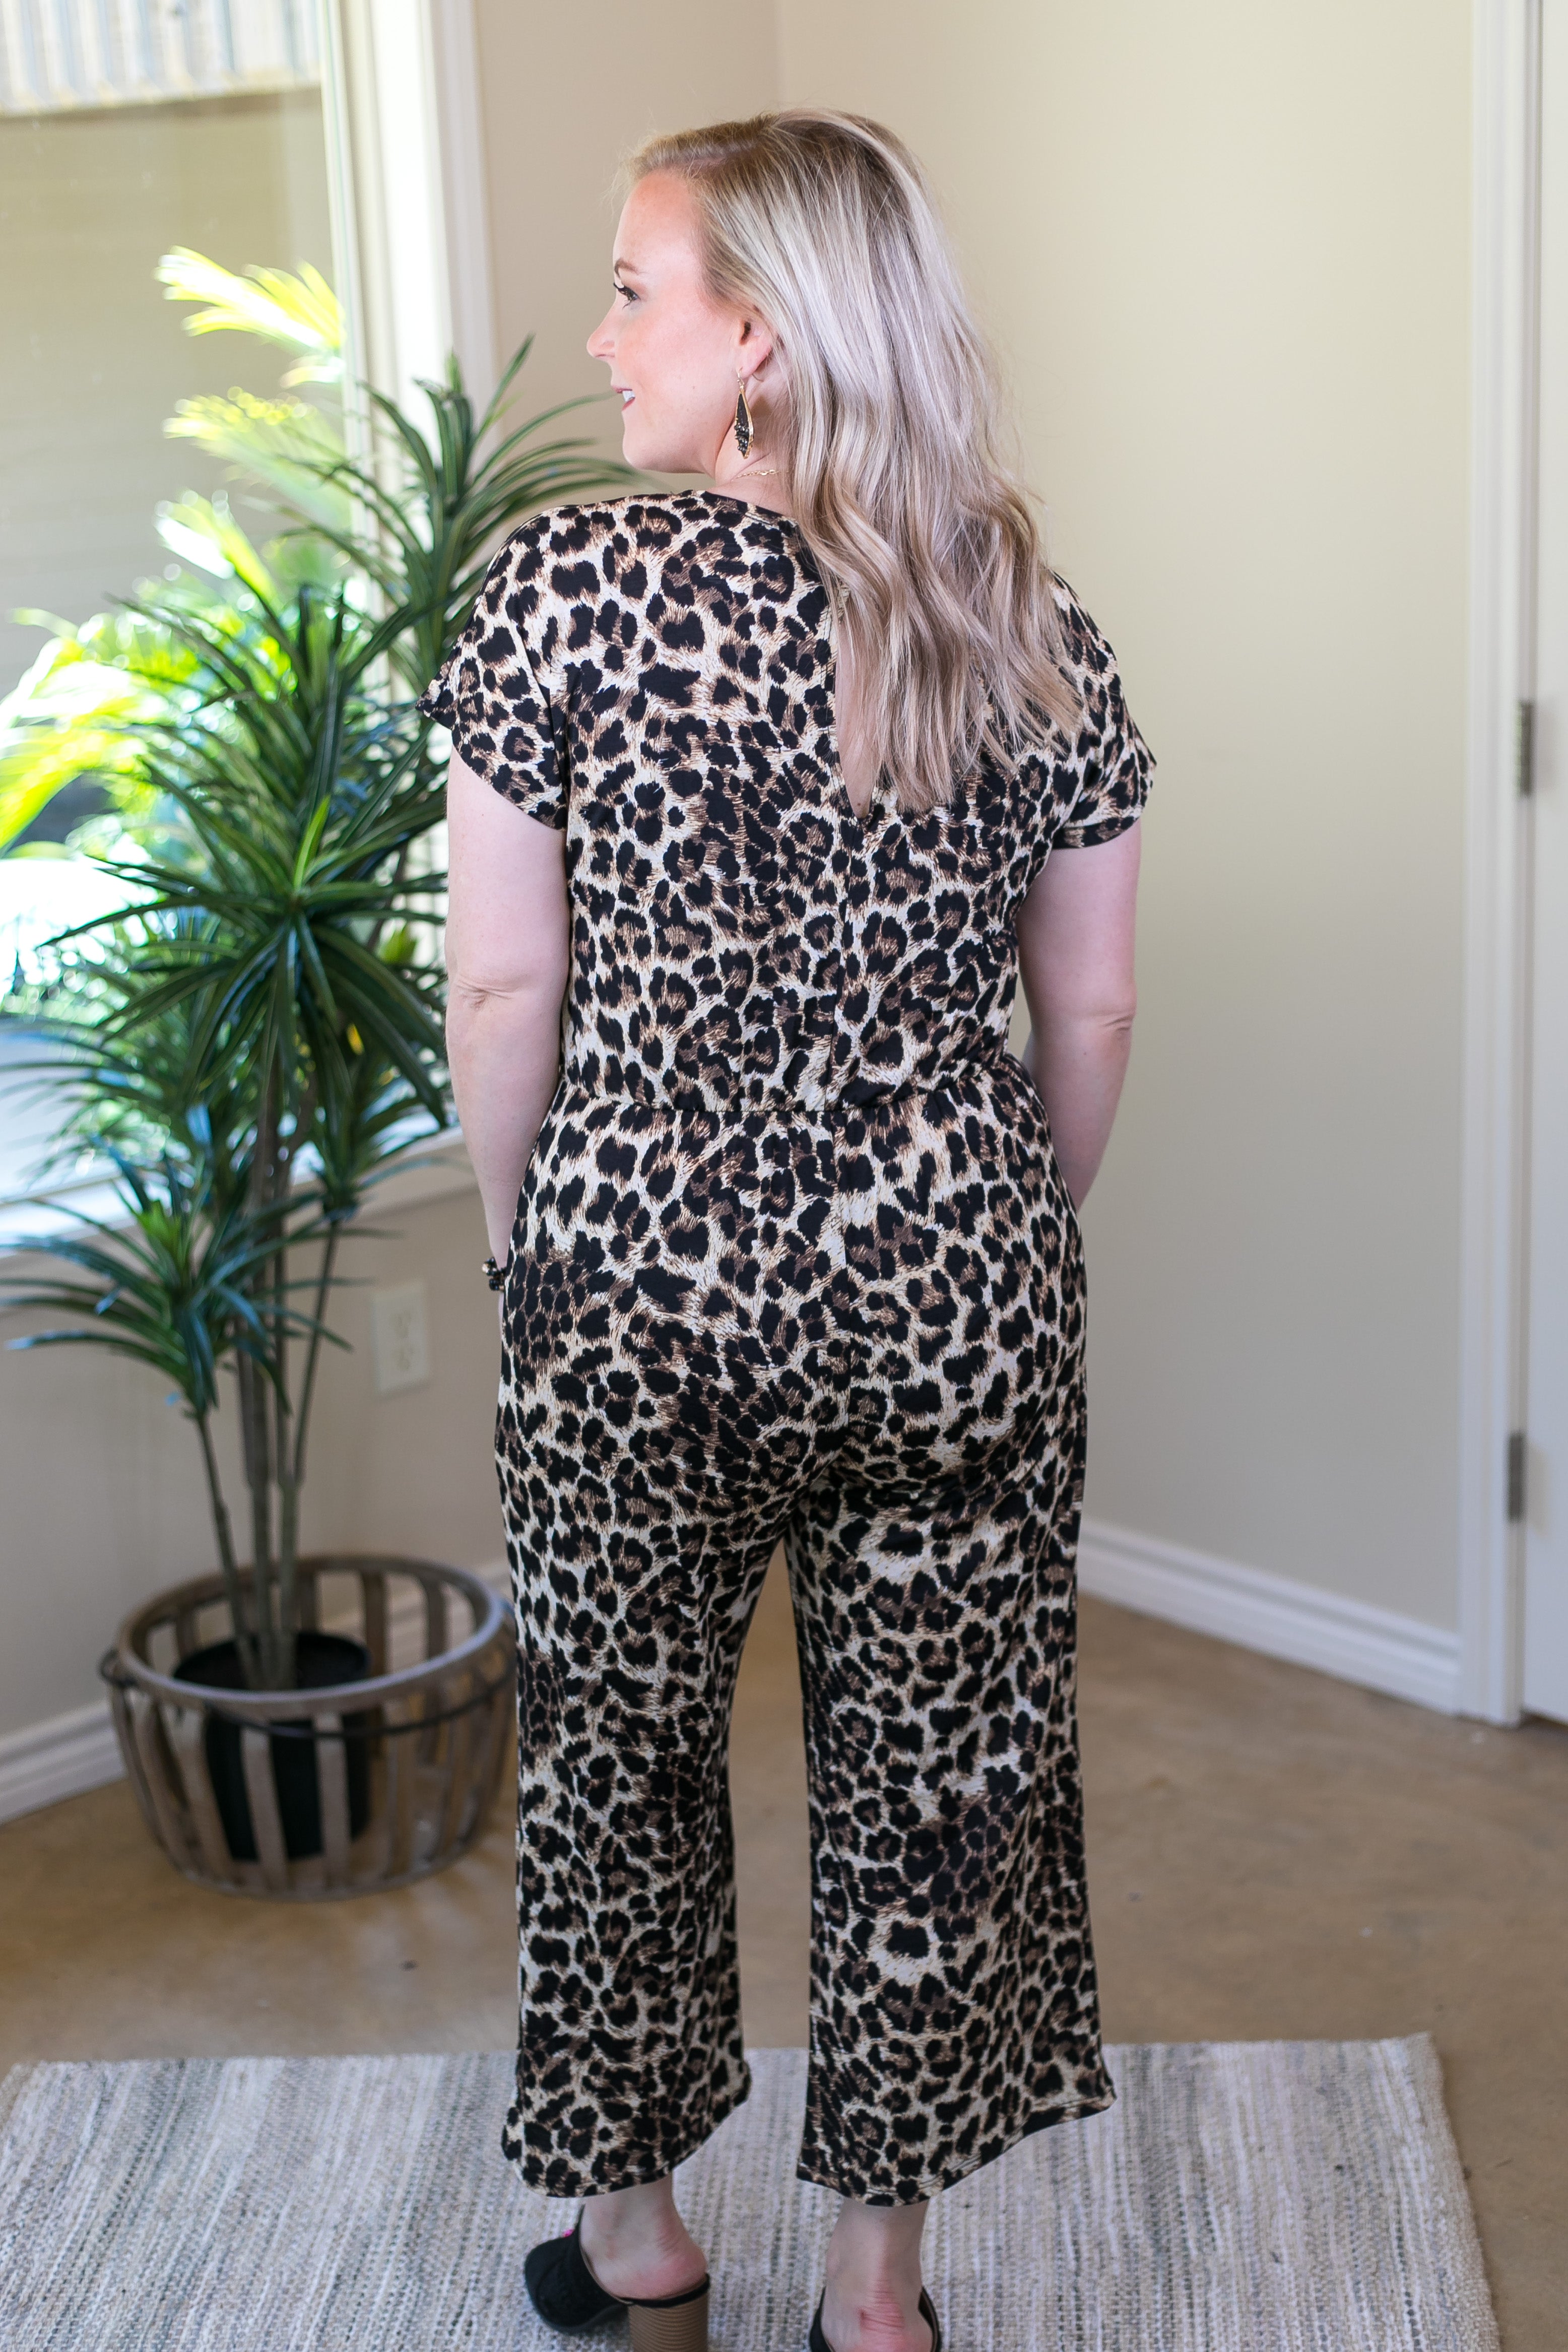 Find My Love Short Sleeve Jumpsuit Romper in Leopard - Giddy Up Glamour Boutique